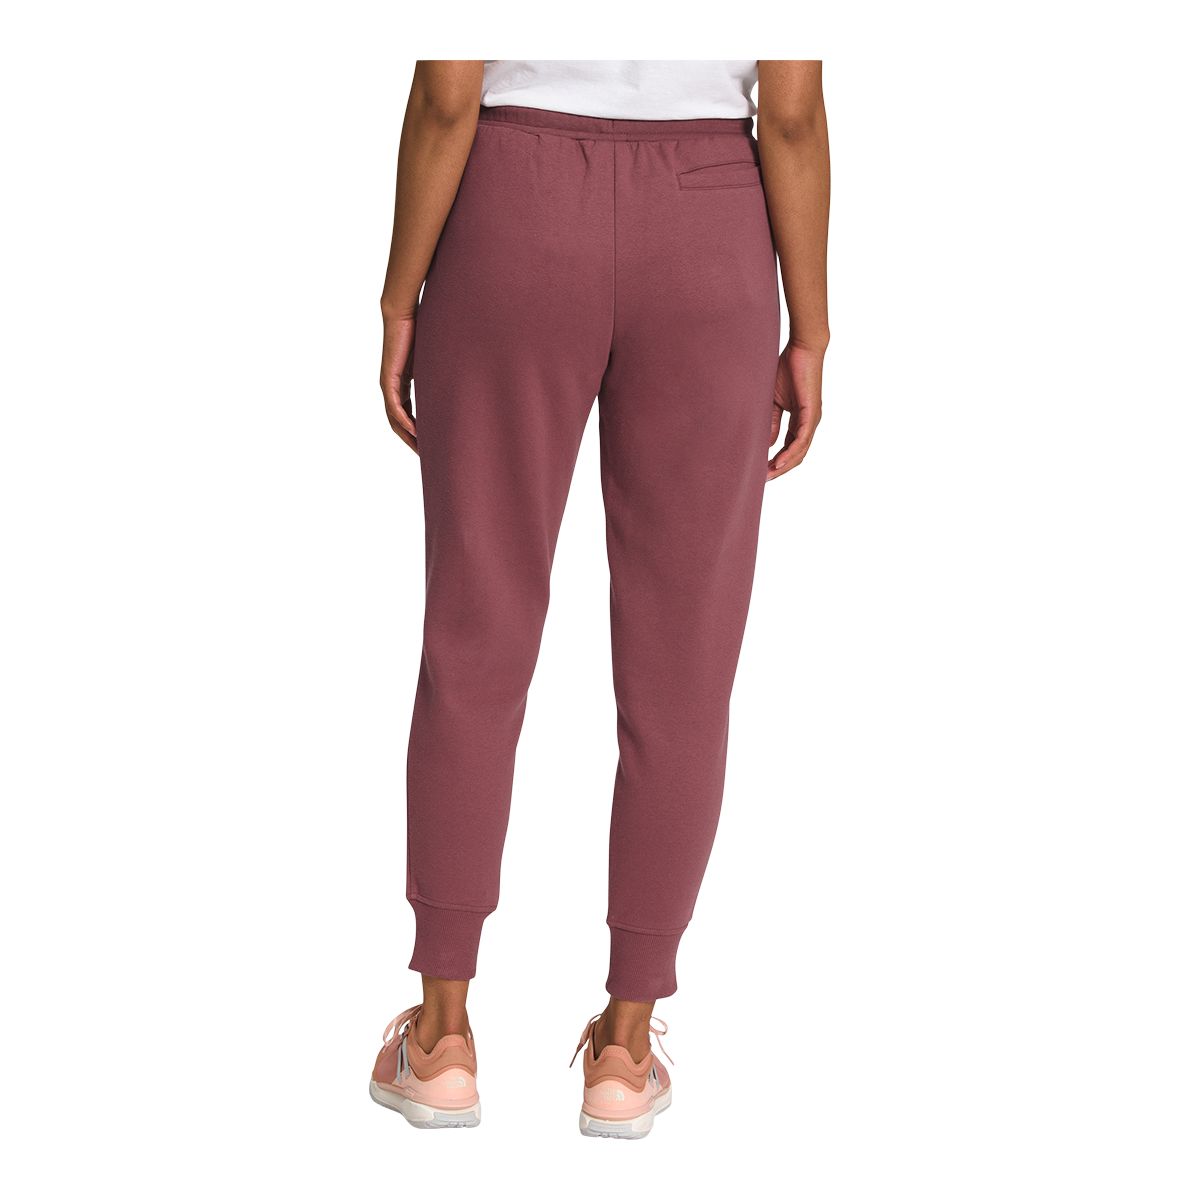 https://media-www.sportchek.ca/product/div-03-softgoods/dpt-72-casual-clothing/sdpt-02-womens/333856018/tnf-w-box-nse-jogger-822-wild-ginger-b01e016f-a6c7-41ef-b0ed-8cab52e7d8c8-jpgrendition.jpg?imdensity=1&imwidth=1244&impolicy=mZoom